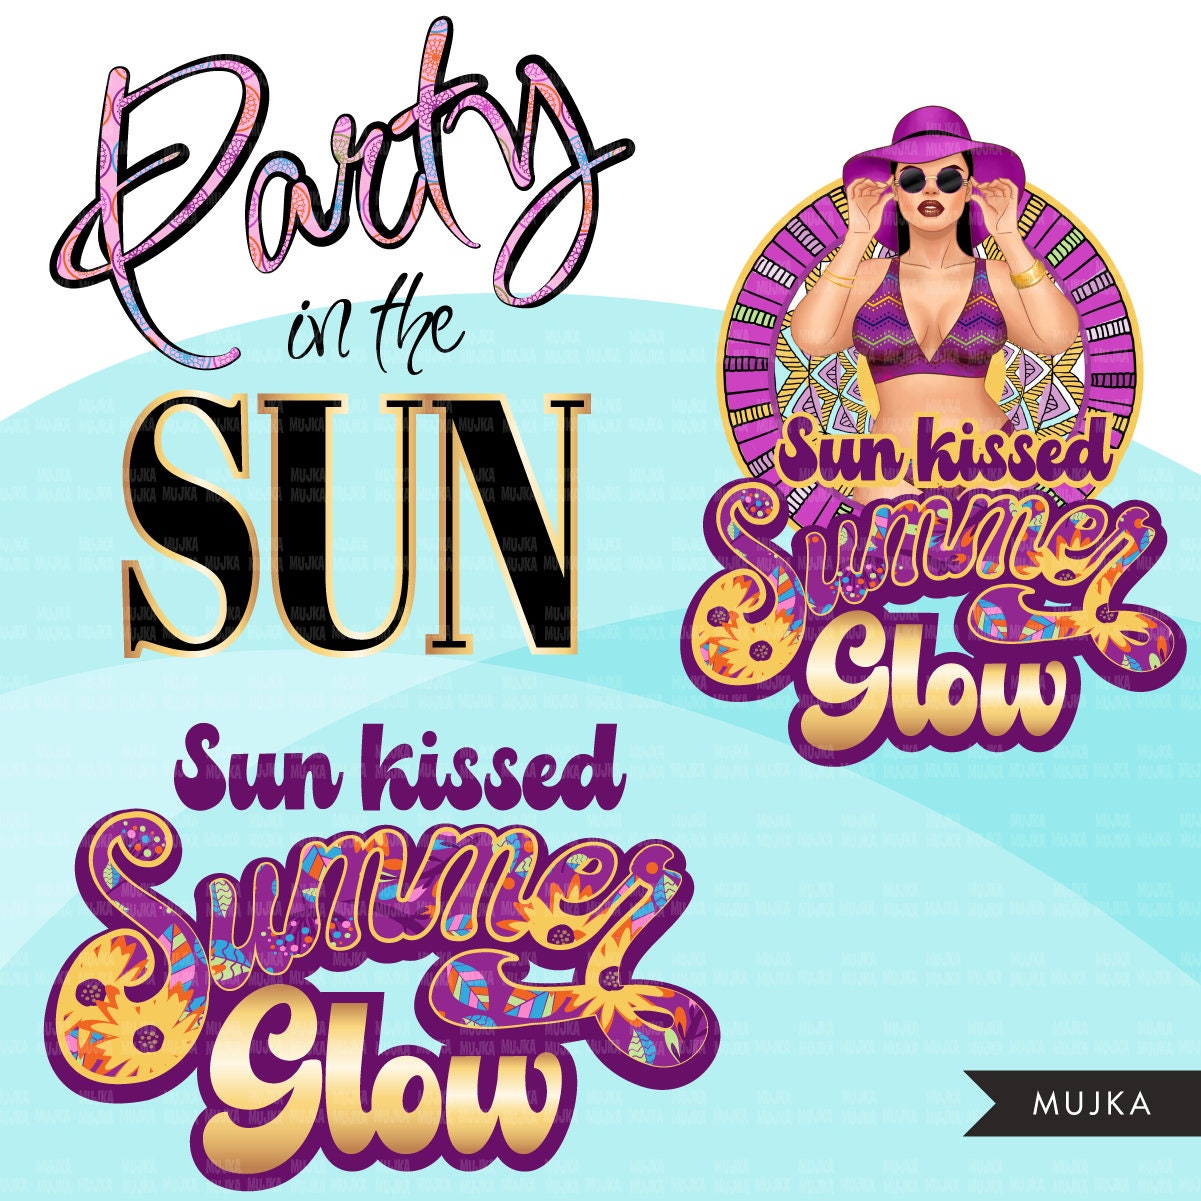 summer bundle, sublimation png, bikini png, digital papers, summer stickers, travel png, pre-cropped png stickers, vacation png bundle